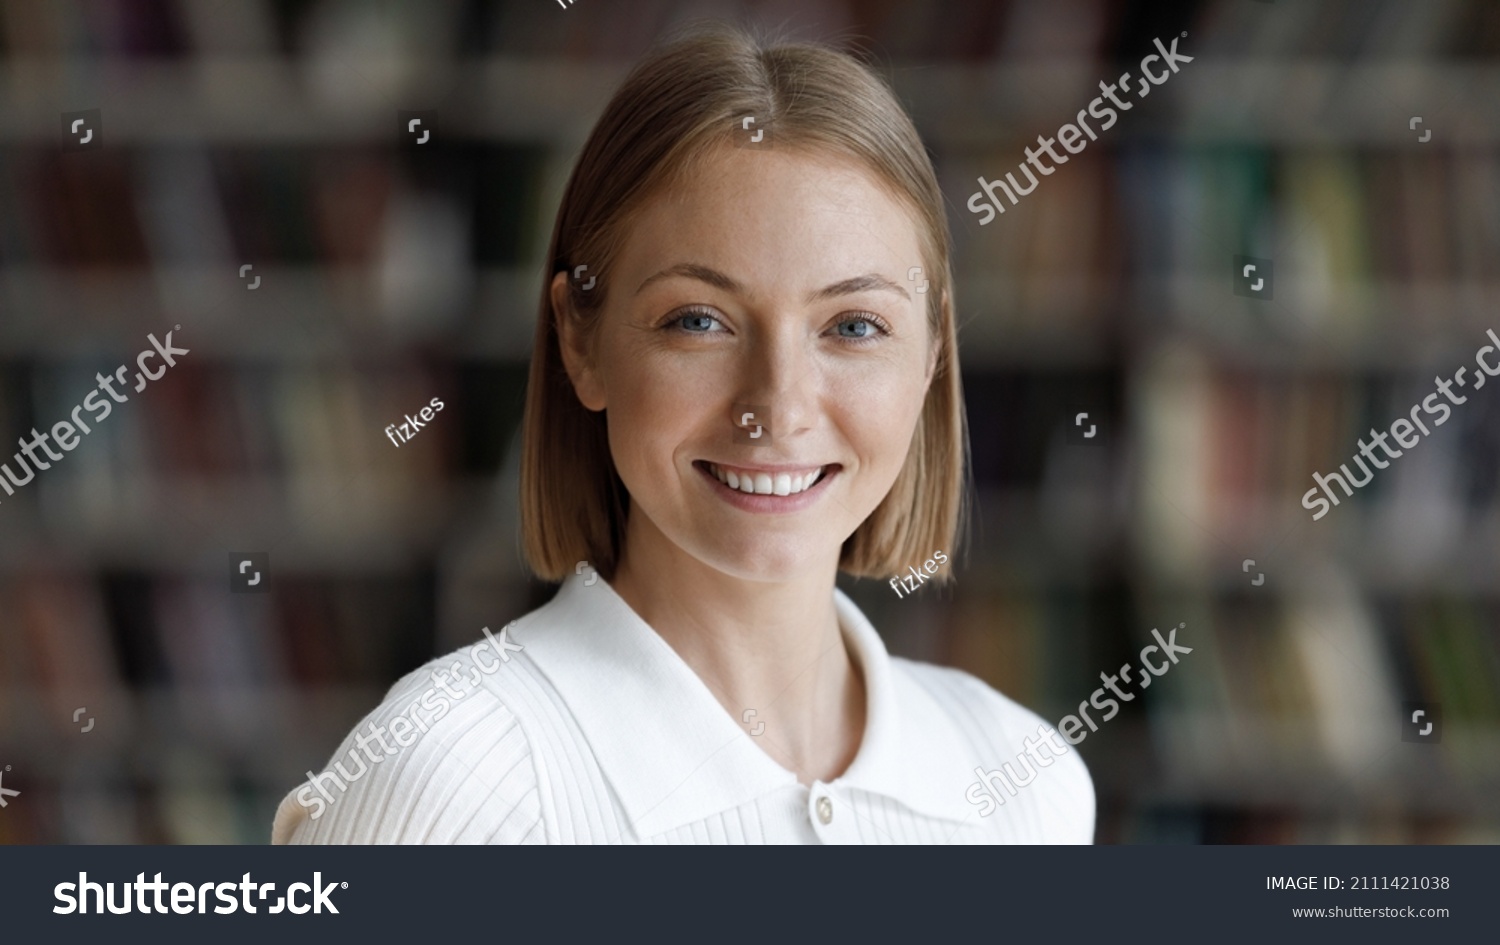 Happy pretty college student girl posing in university library with blurred bookshelves behind. Young millennial woman looking at camera with toothy smile head shot portrait #2111421038